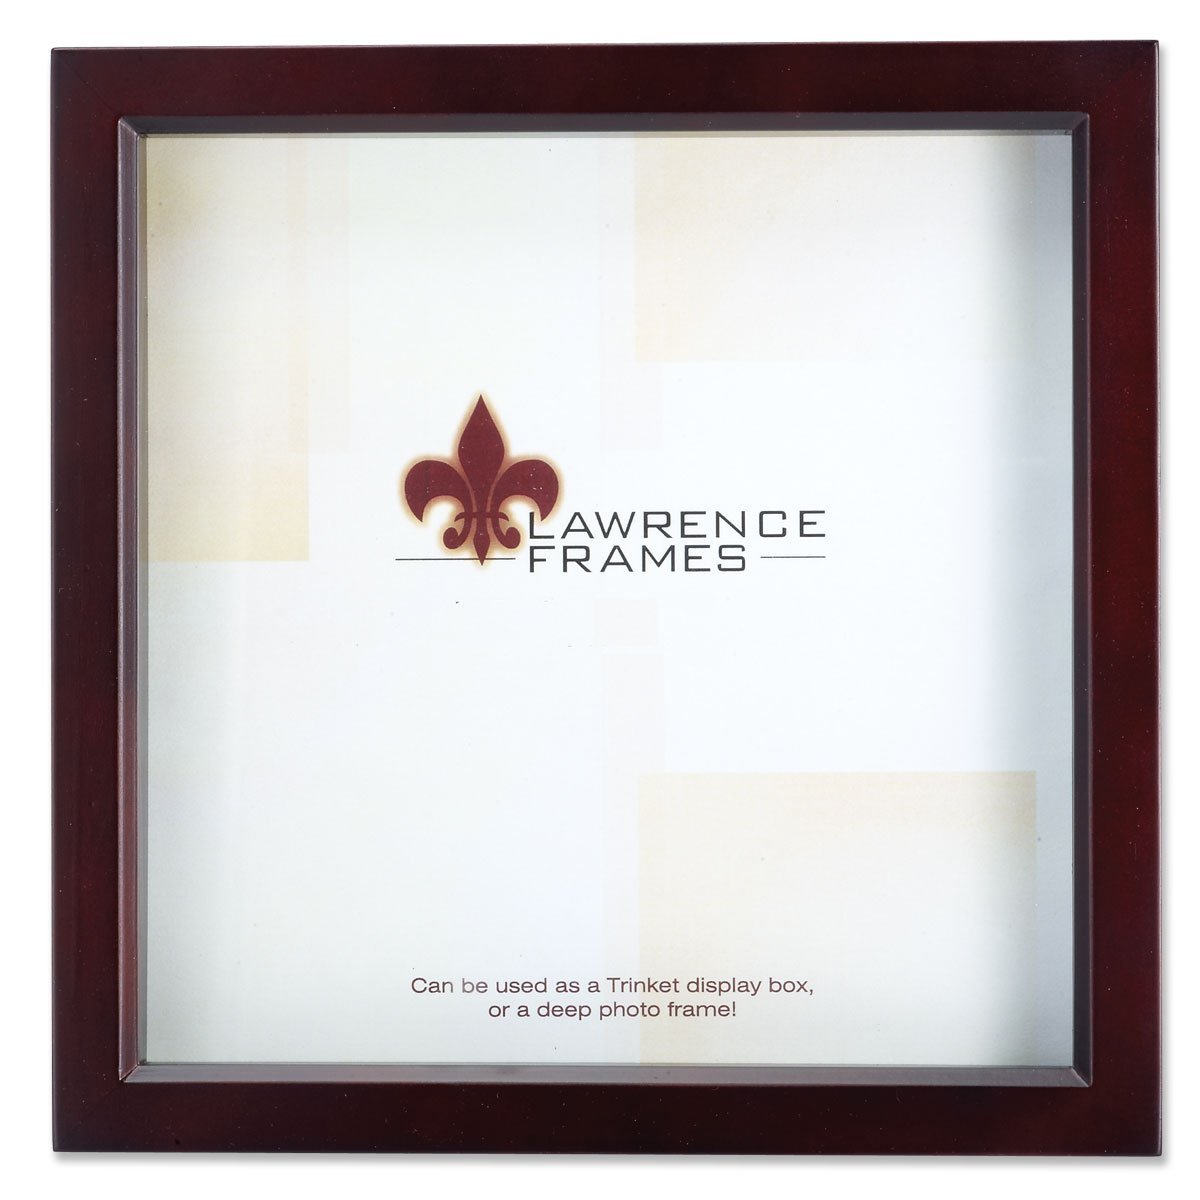 Lawrenceframes 795155 5 X 5 In. Treasure Box Shadow Picture Frame, Brown